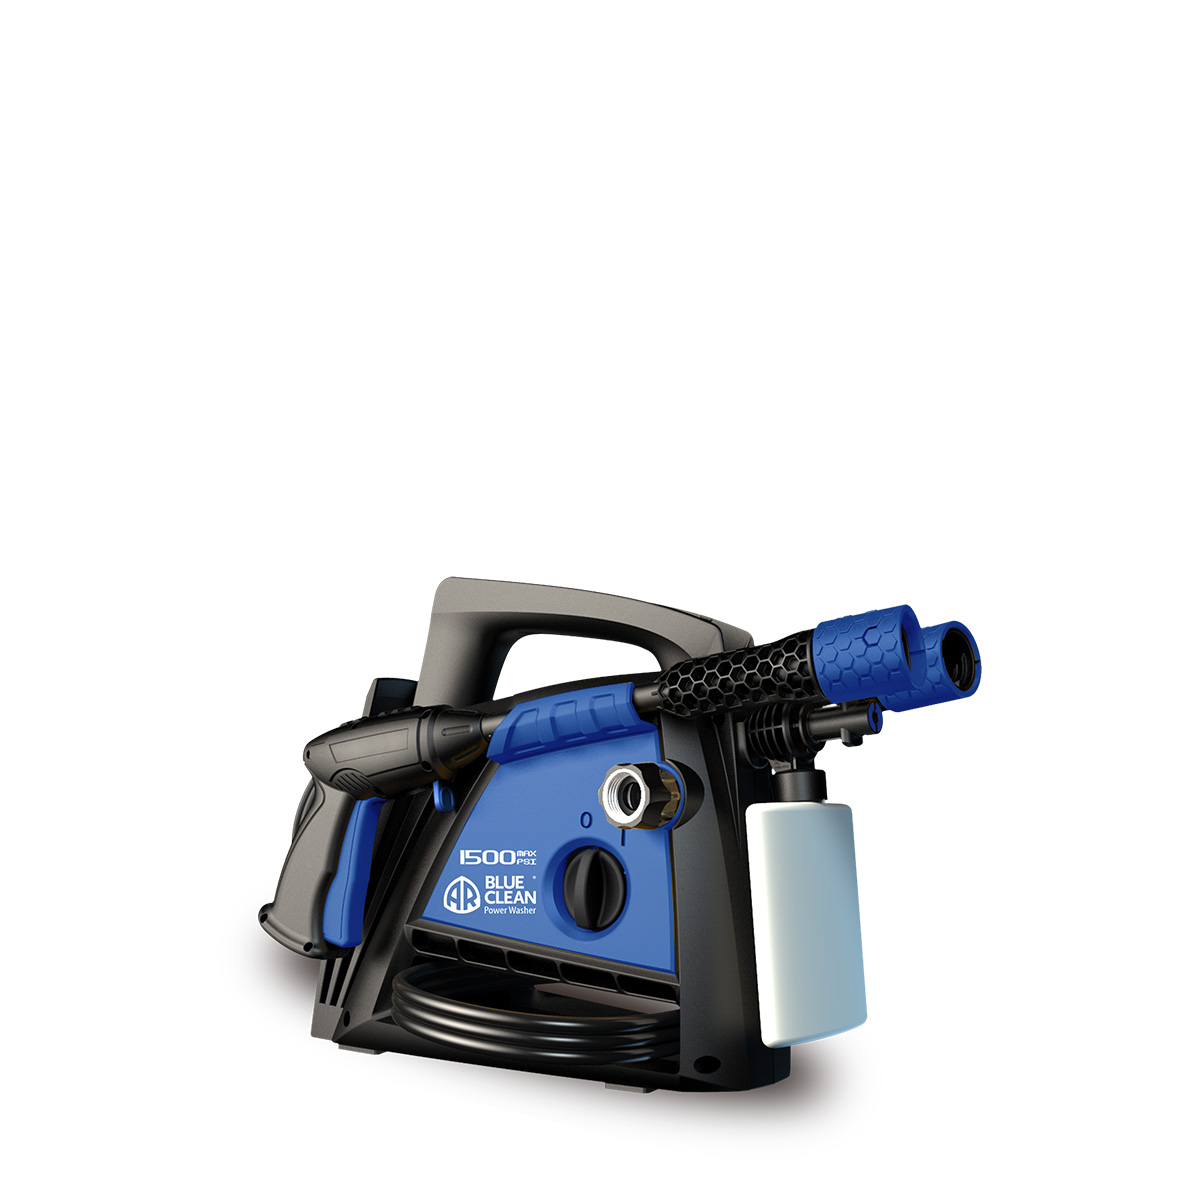 AR Blue Clean AR1500, 1500 PSI 1.2 GPM, Portable Electric Pressure Washer Questions & Answers